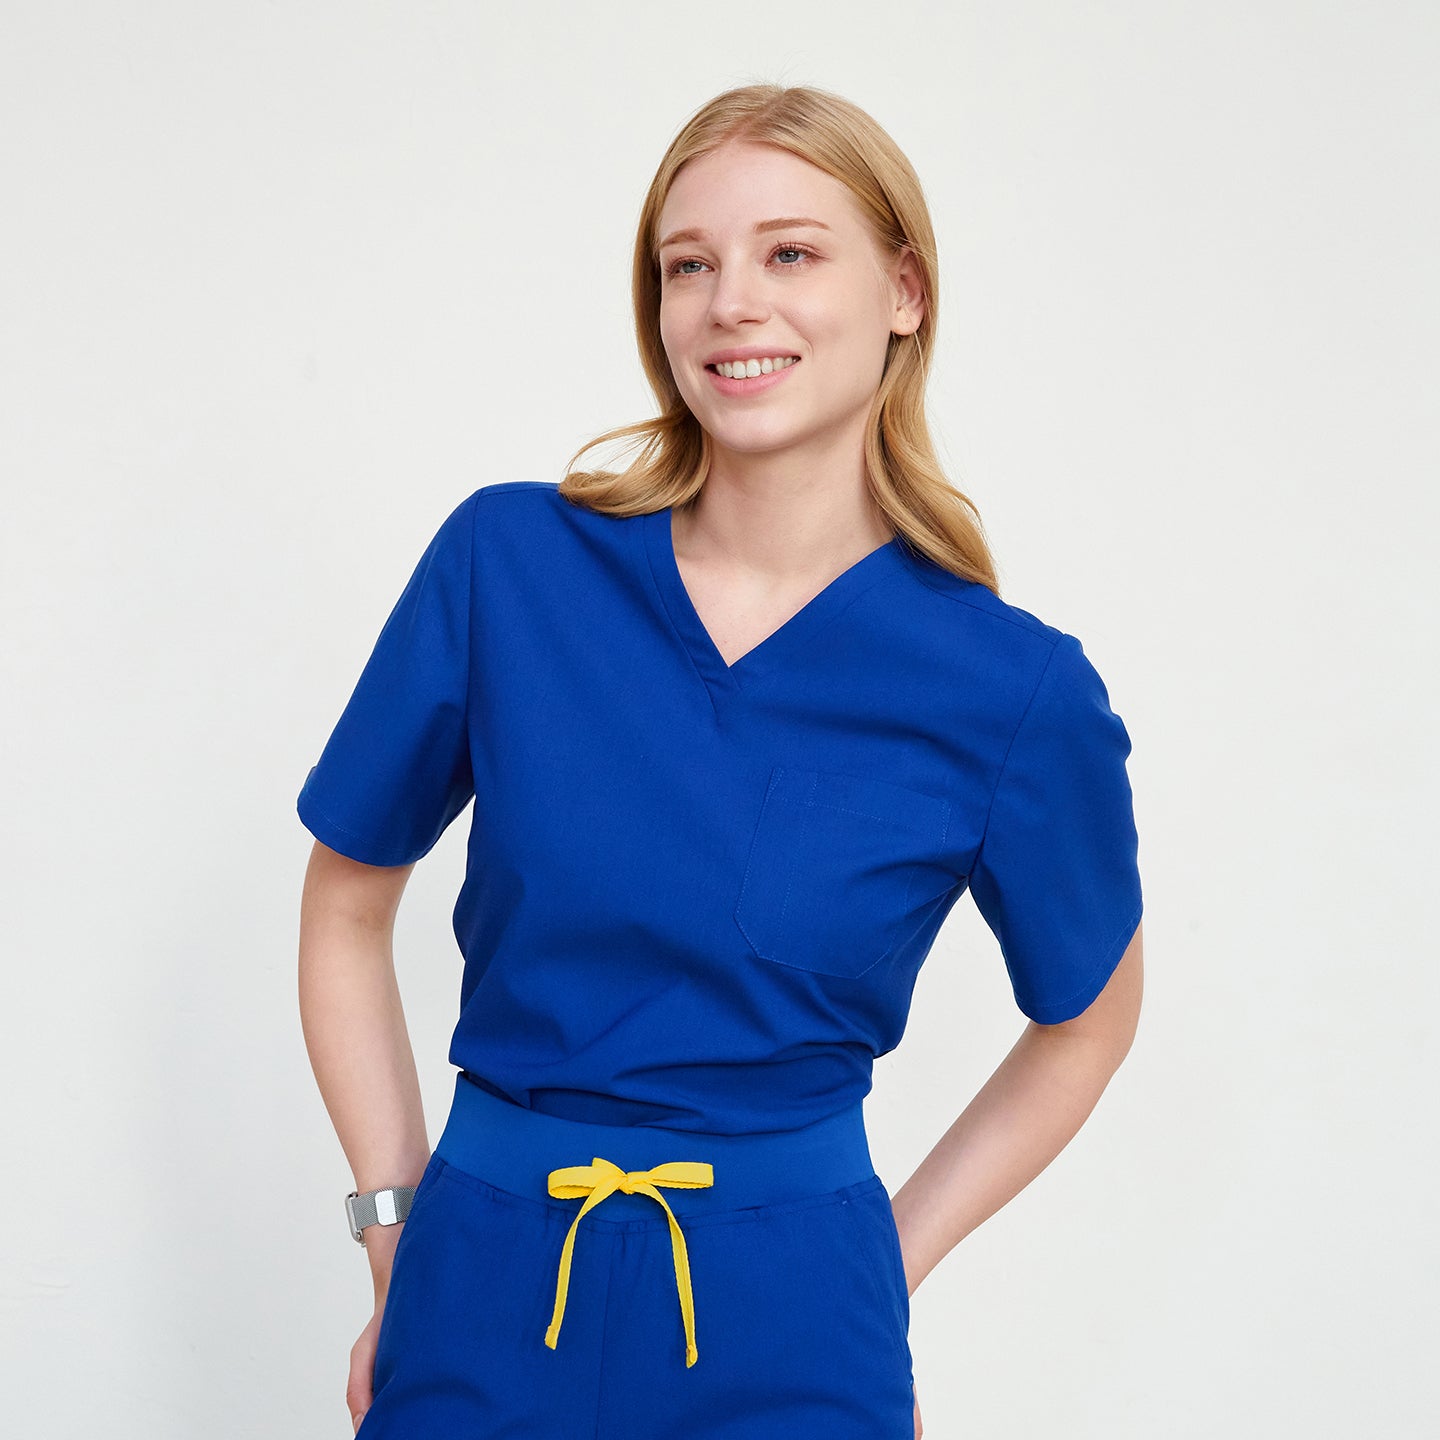 Blonde woman smiling, wearing a V-neck scrub top with a chest pocket, and matching pants with a yellow drawstring,Royal Blue